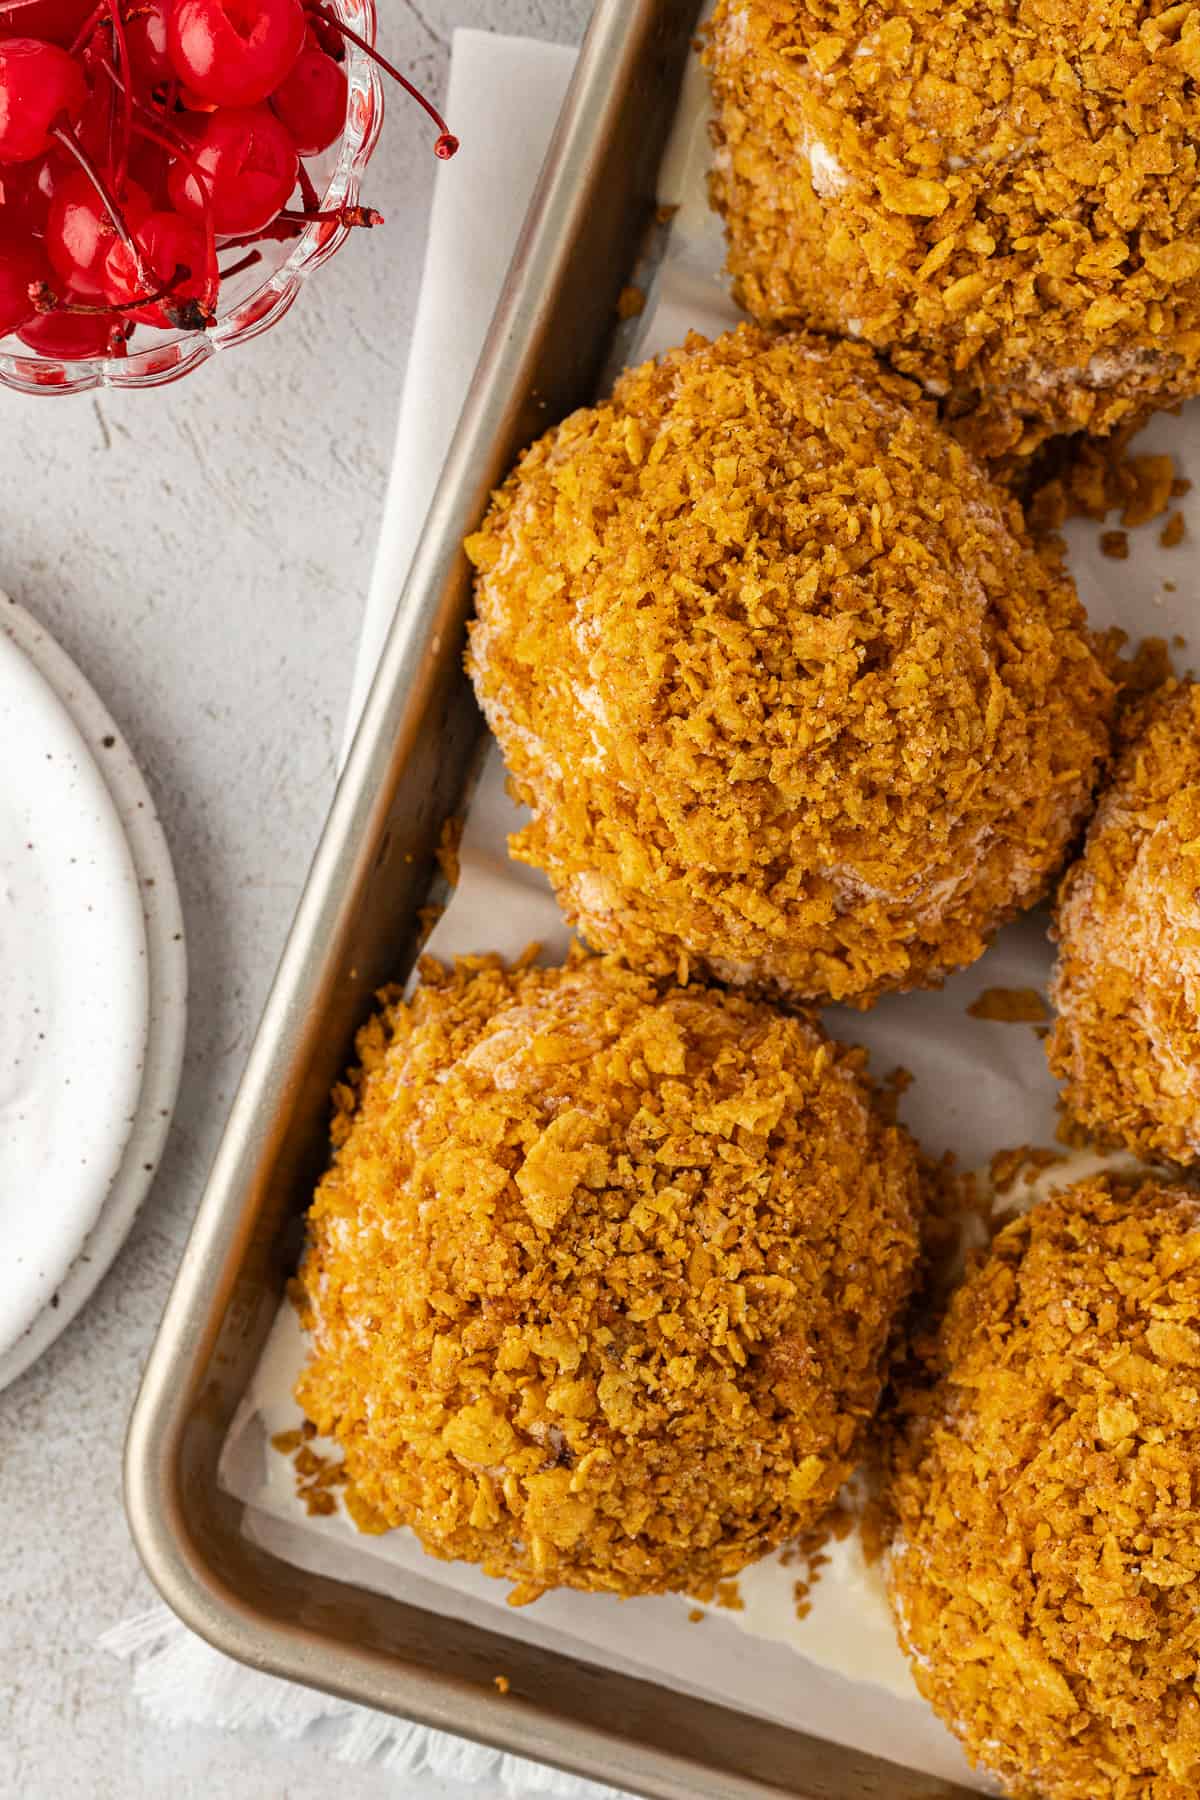 fried ice cream balls in rows on a sheet pan beside a small plate and a bowl of cherries